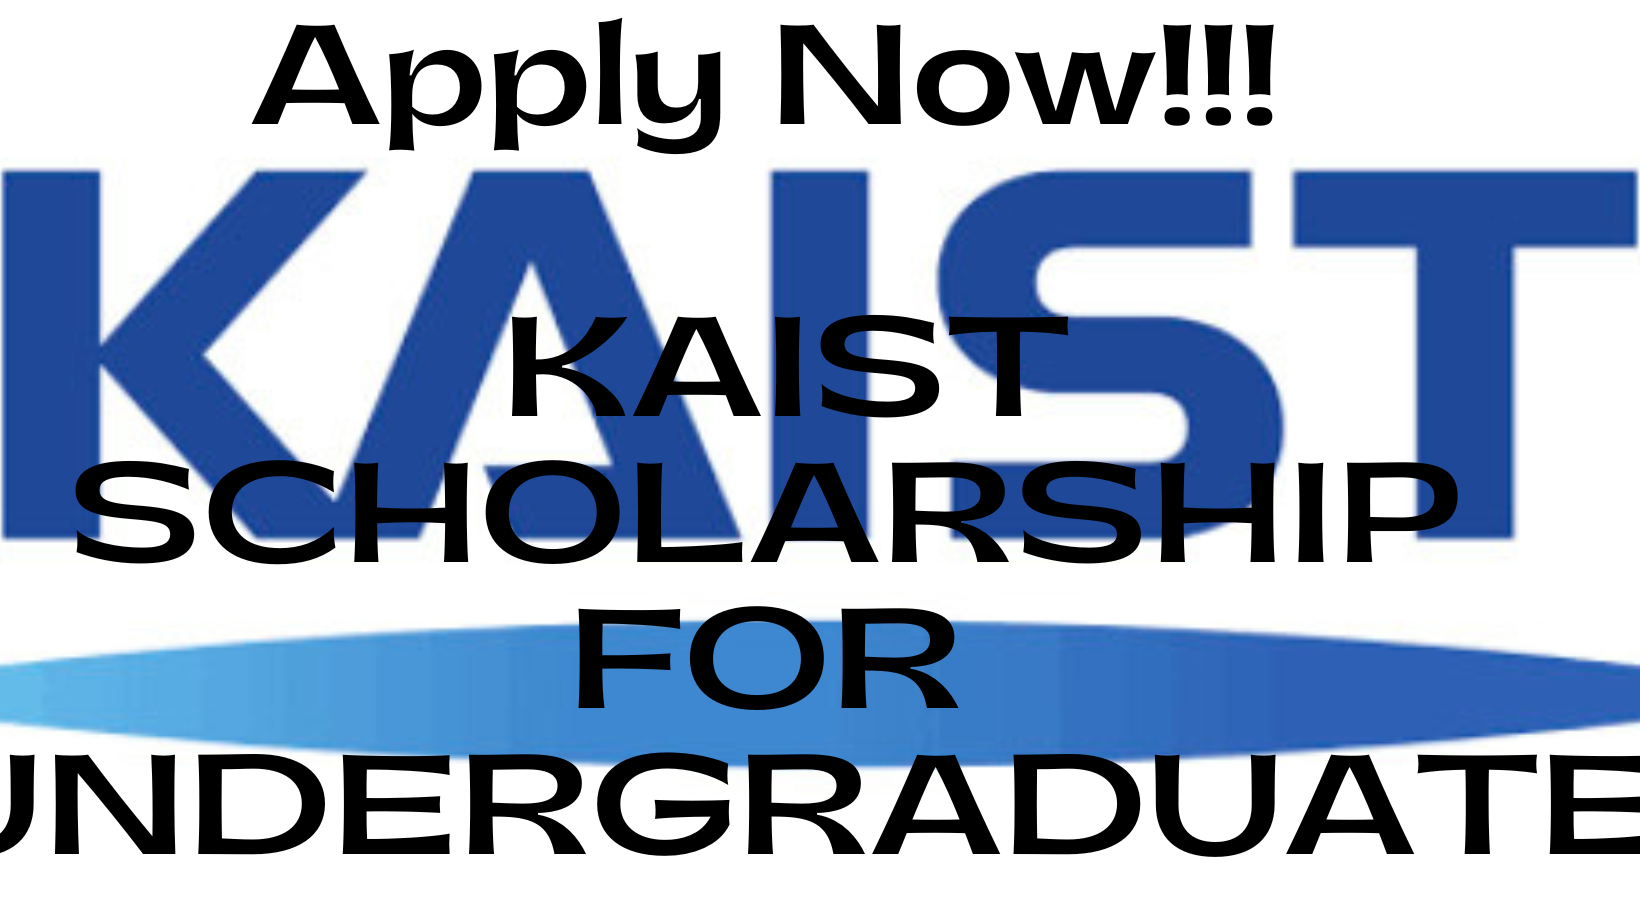 png 20221013 144106 0000 - KAIST Undergraduate Scholarship 2023 in South Korea | Fully Funded